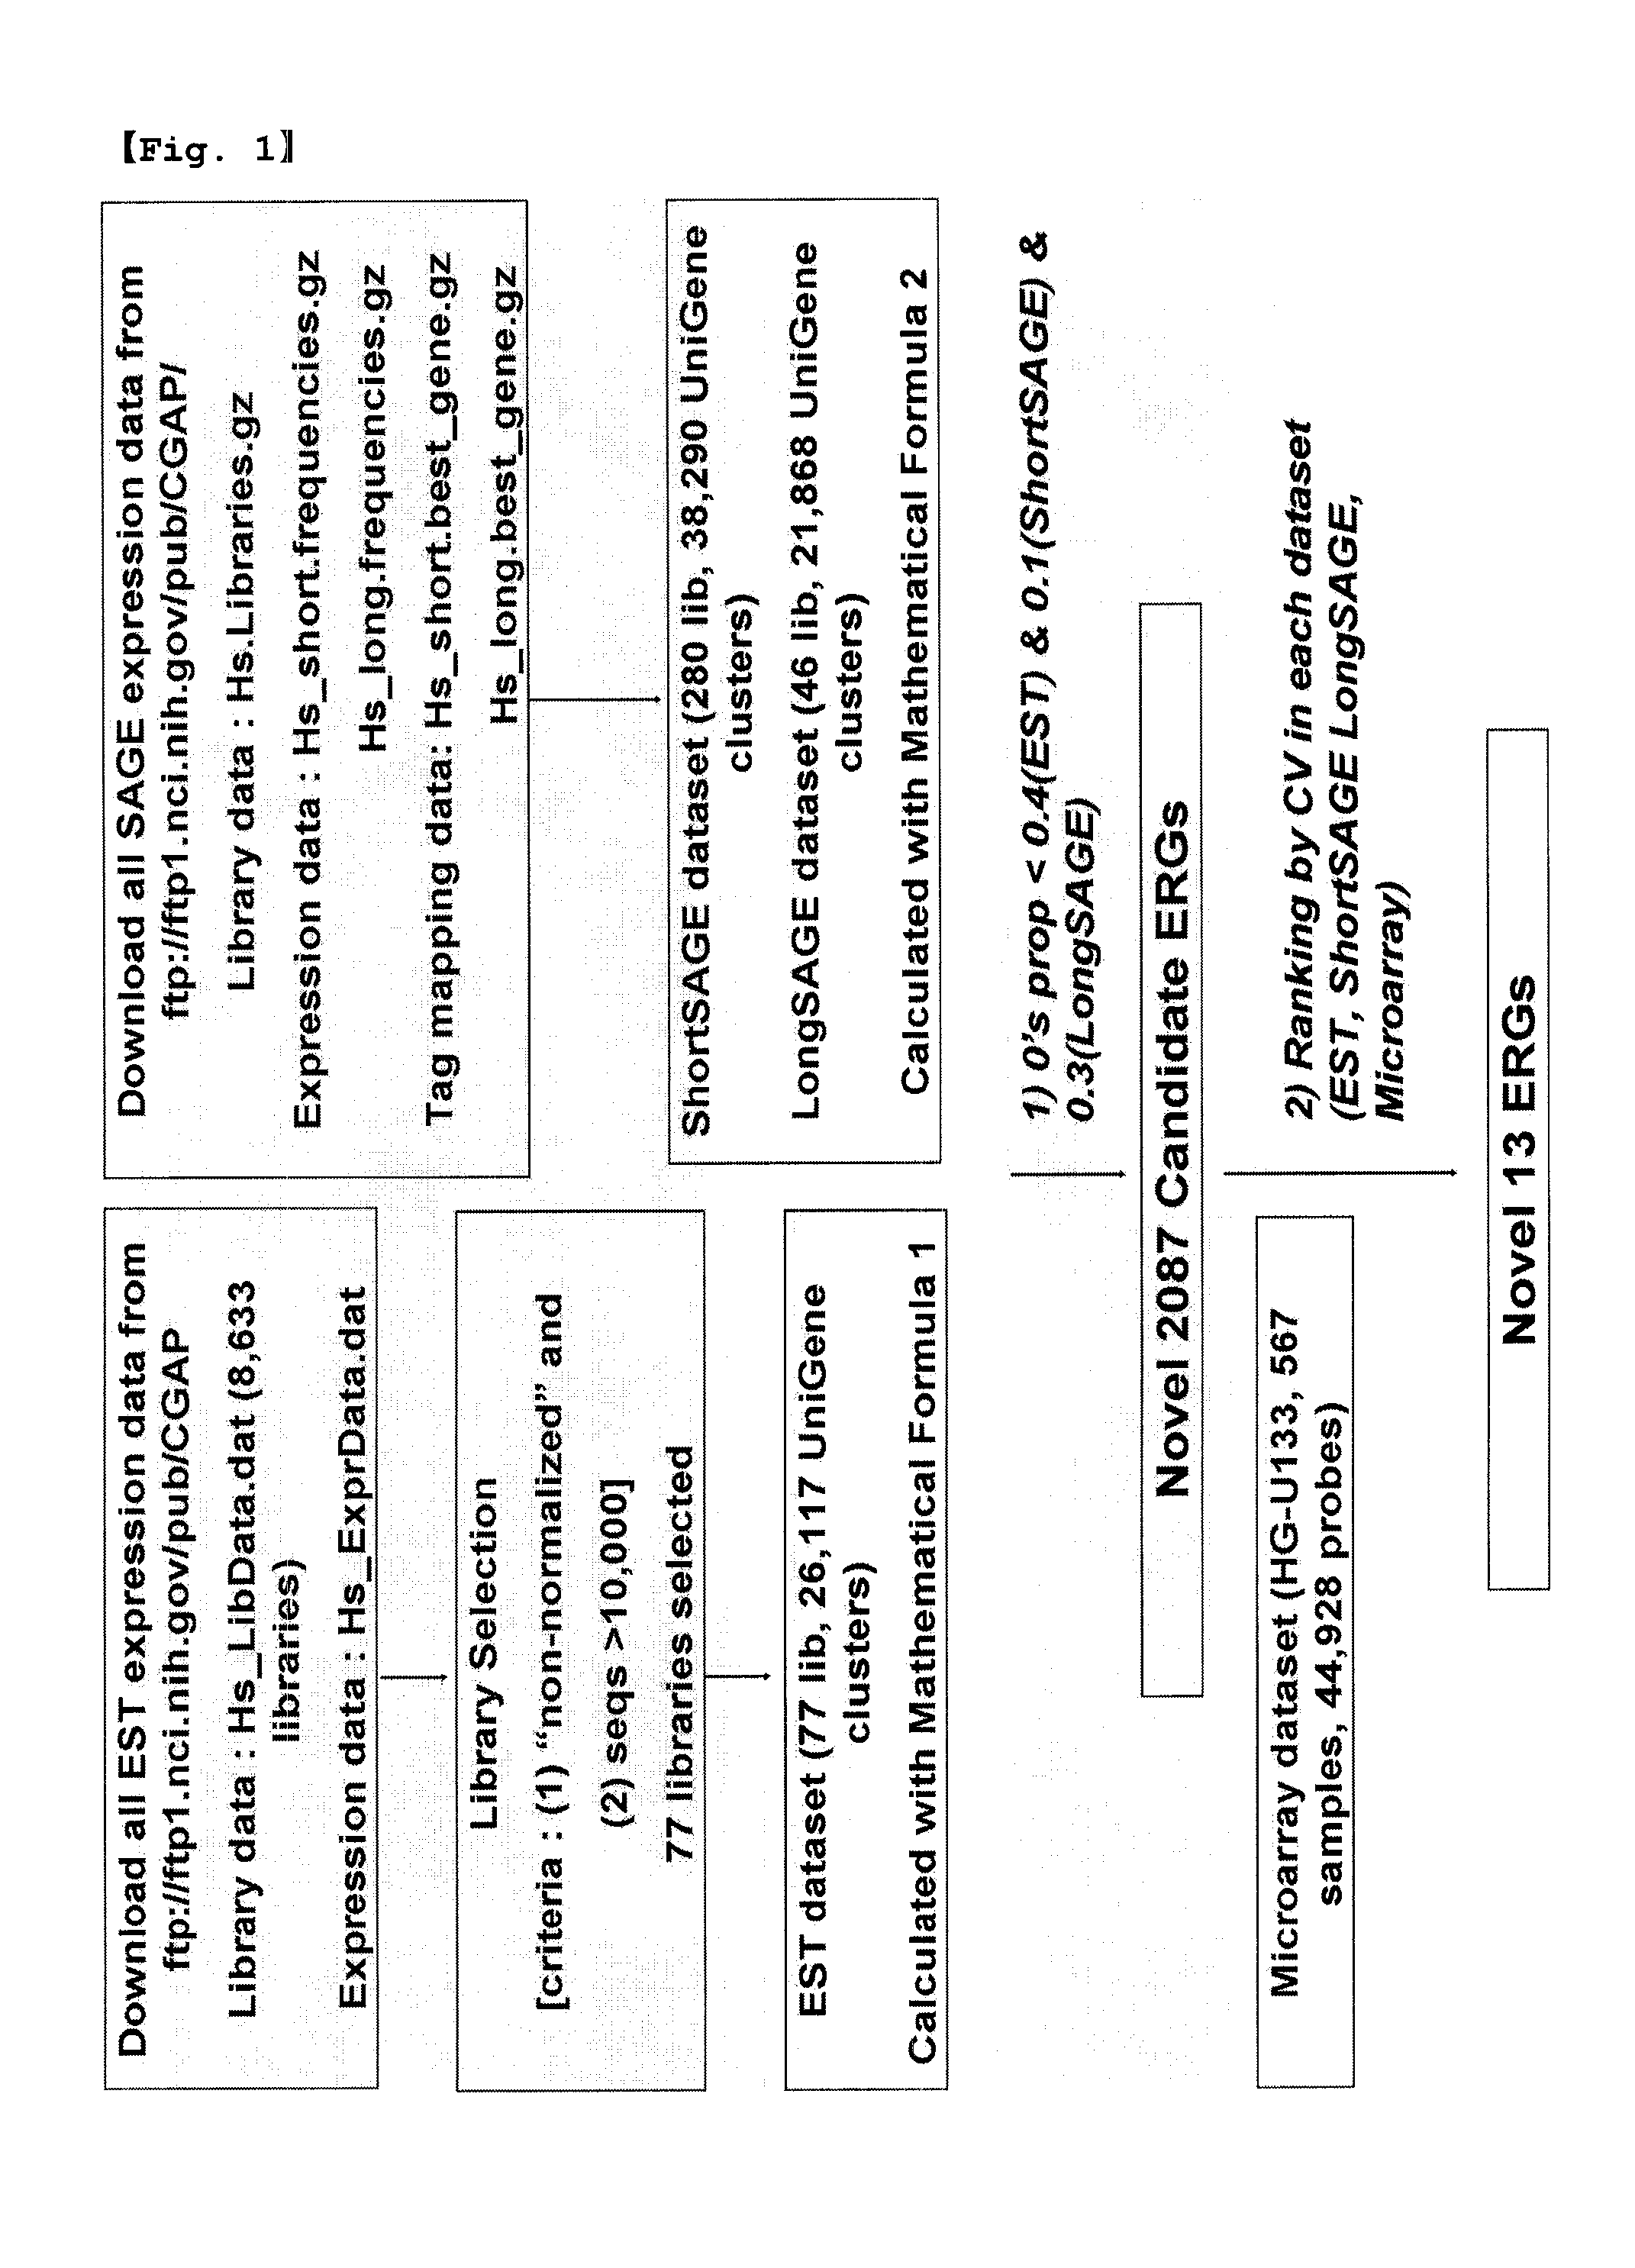 Data processing, analysis method of gene expression data to identify endogenous reference genes